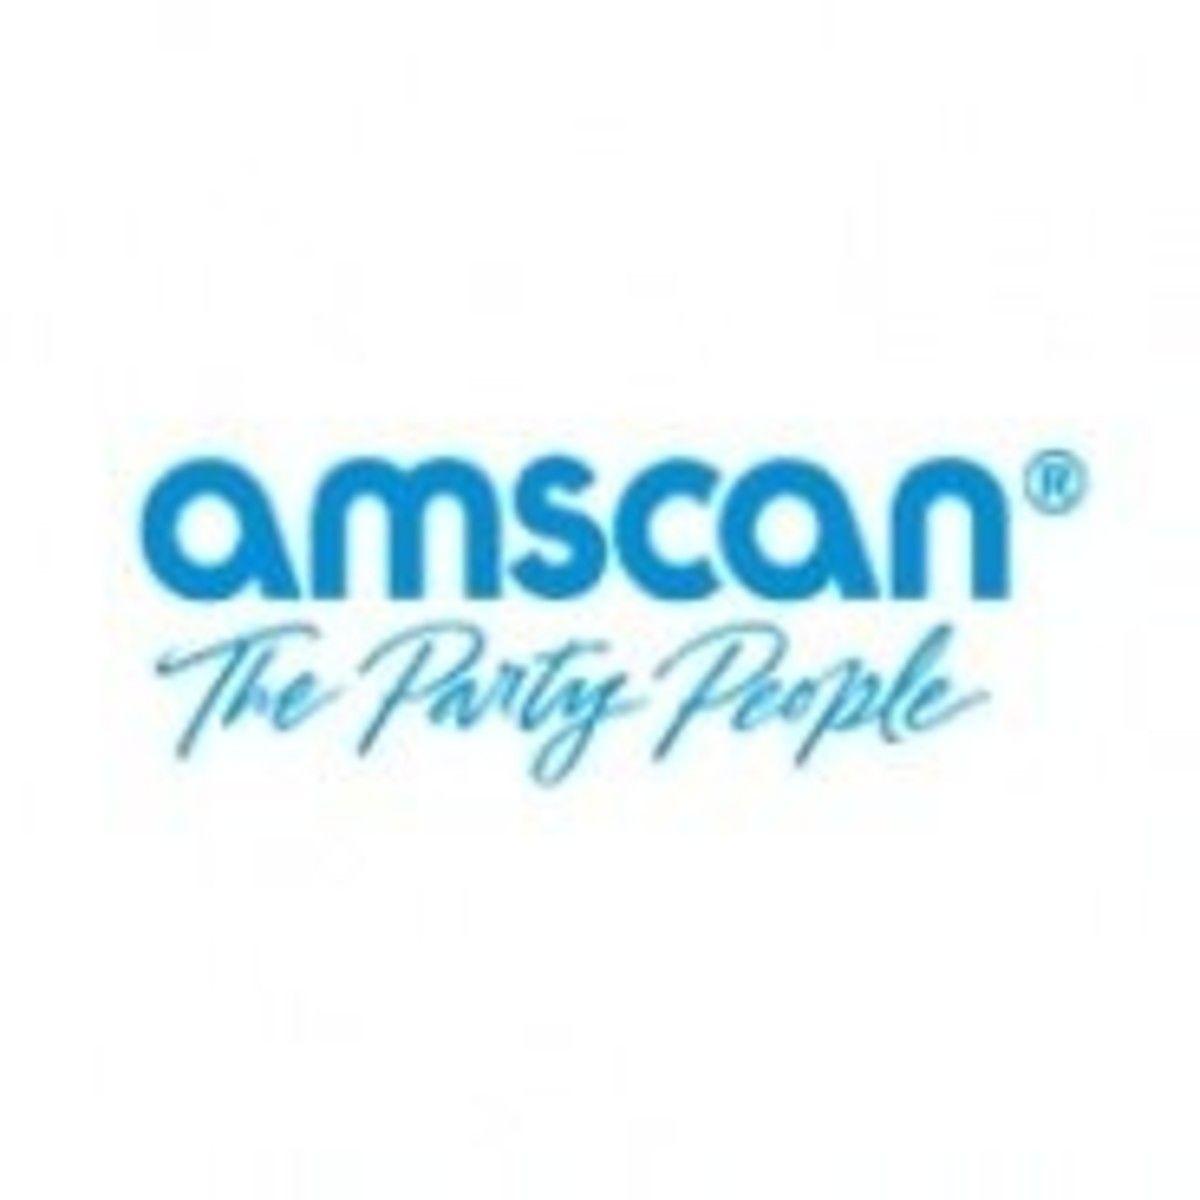 Amscan Logo - Amscan acquires The Christy Group - Licensing.biz